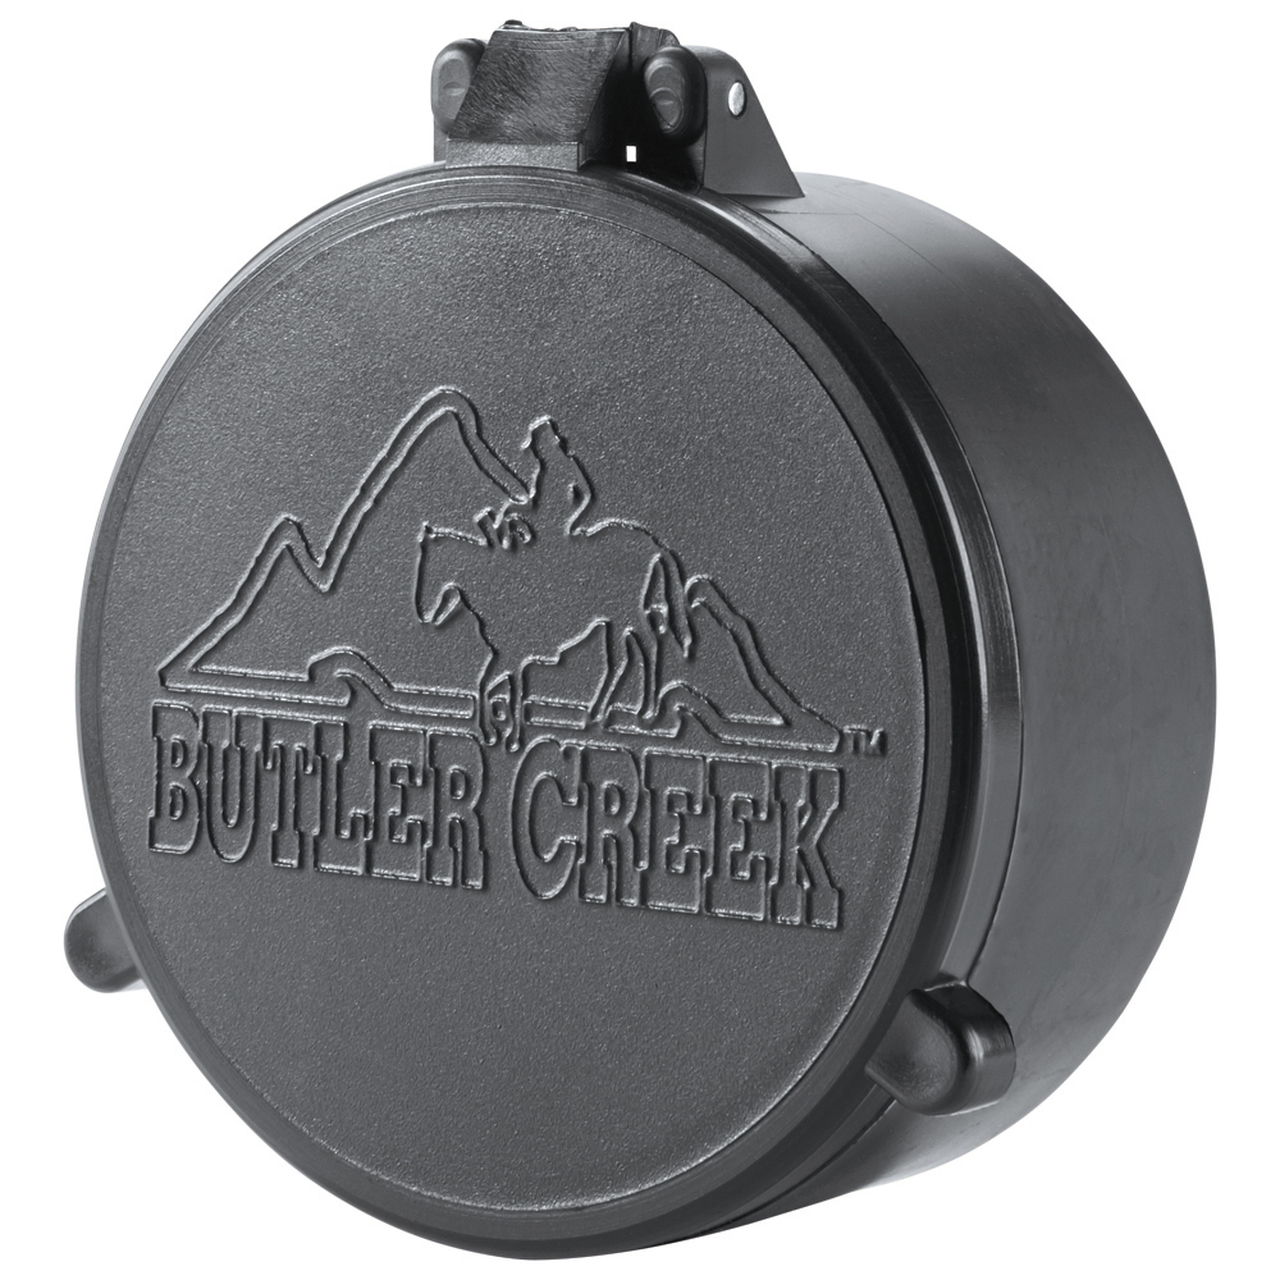 Butler Creek Flip Up Scope Cover Objective Piece 30-31 Black Md: 33031-img-1